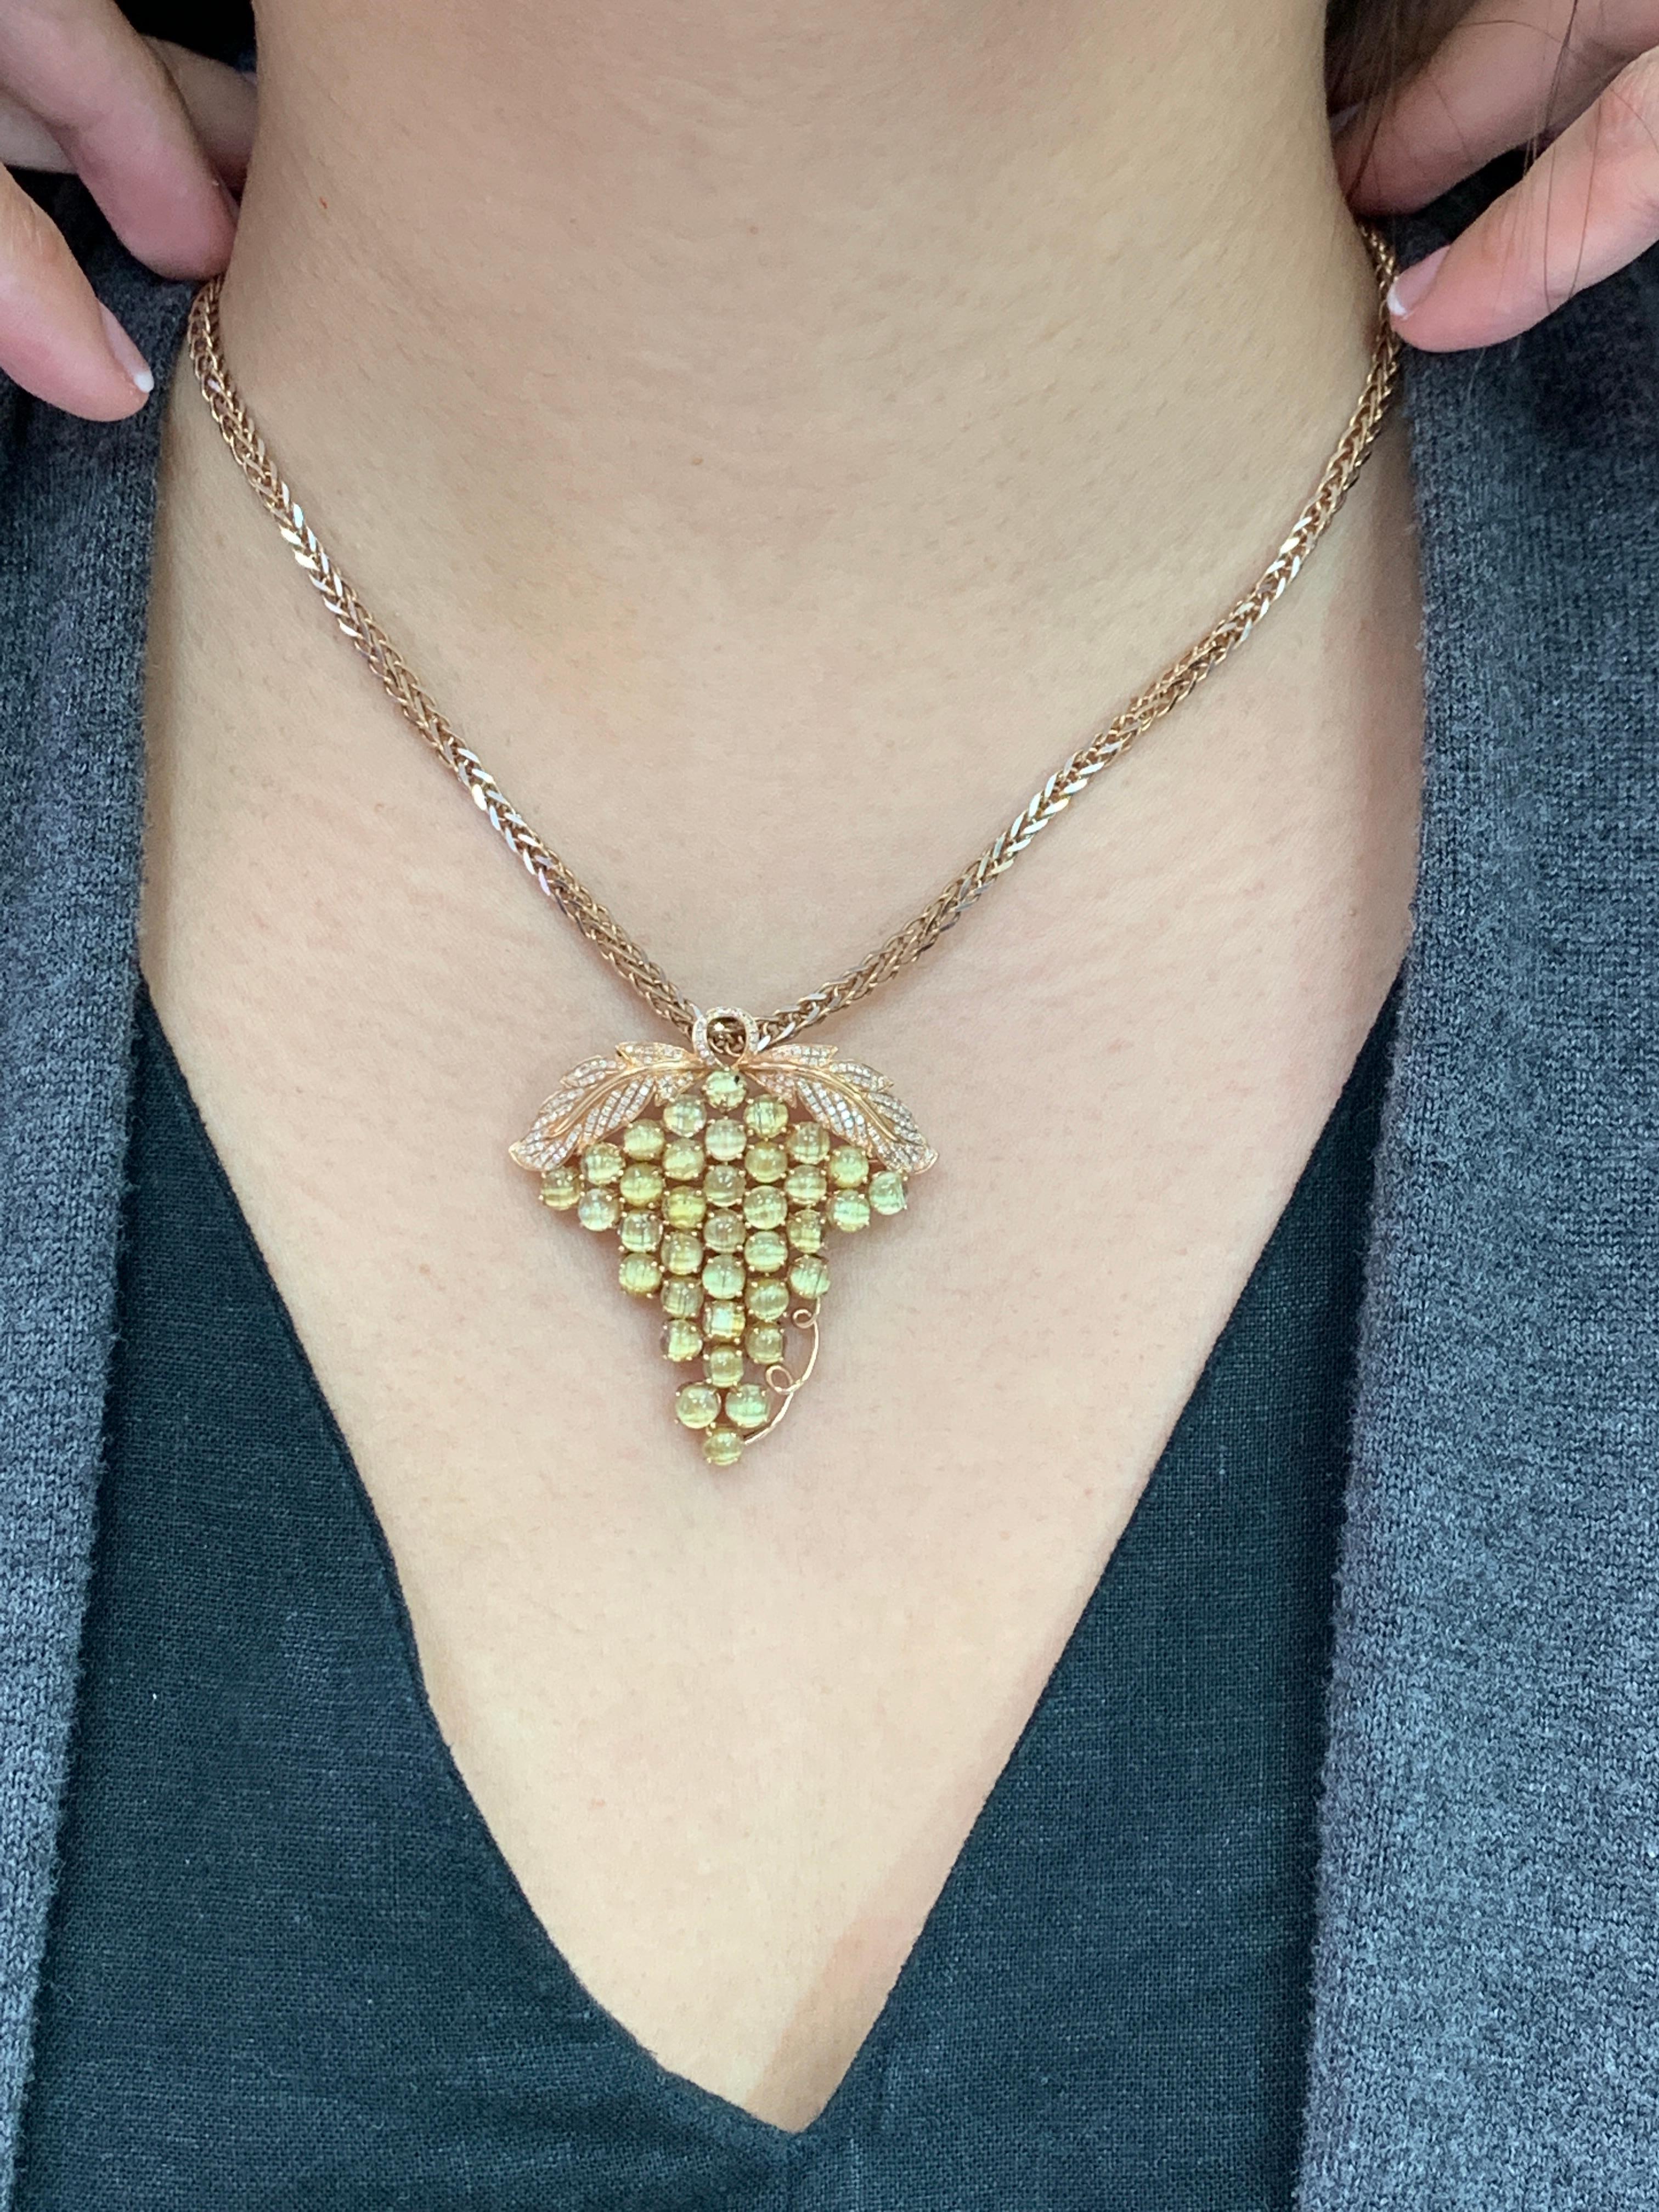 You can wear this as a pendant necklace or a brooch. Here is an exquisite natural Quartz gemstone with golden rutile fine jewelry. It was not easy to put this together. Not only did we have to match the color of each rutile quartz, we also had to